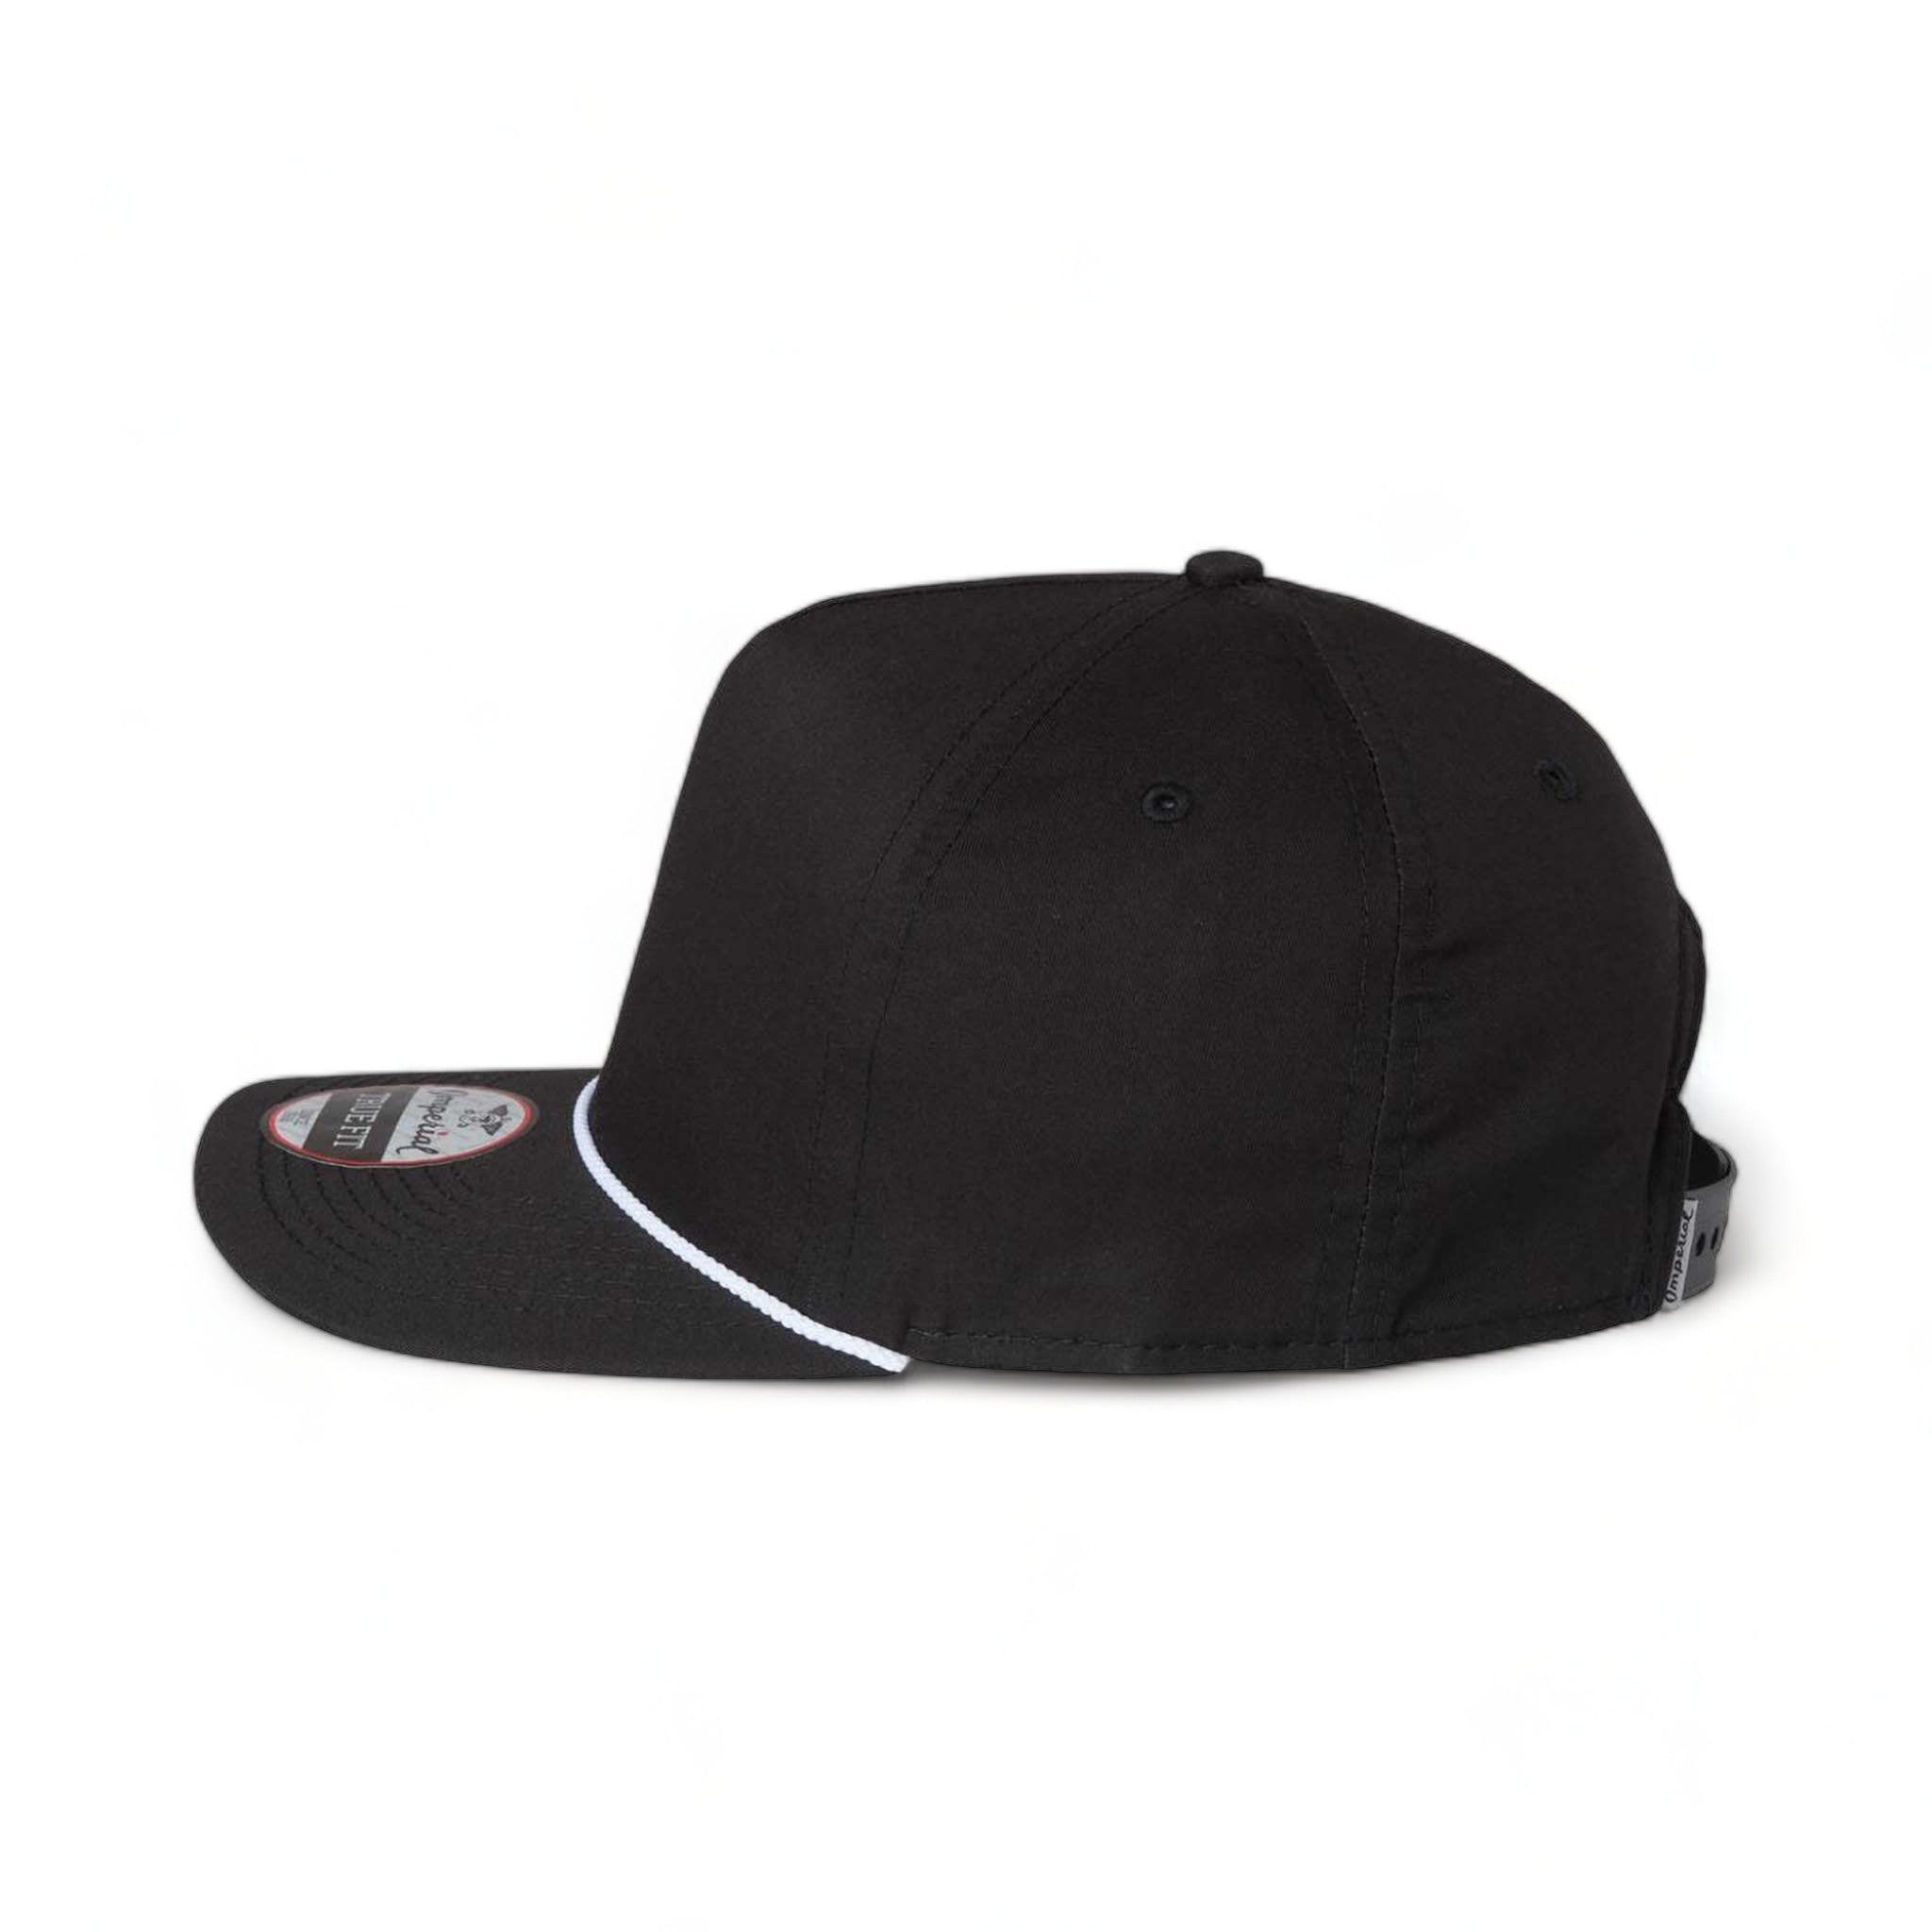 Side view of Imperial 5056 custom hat in black and white